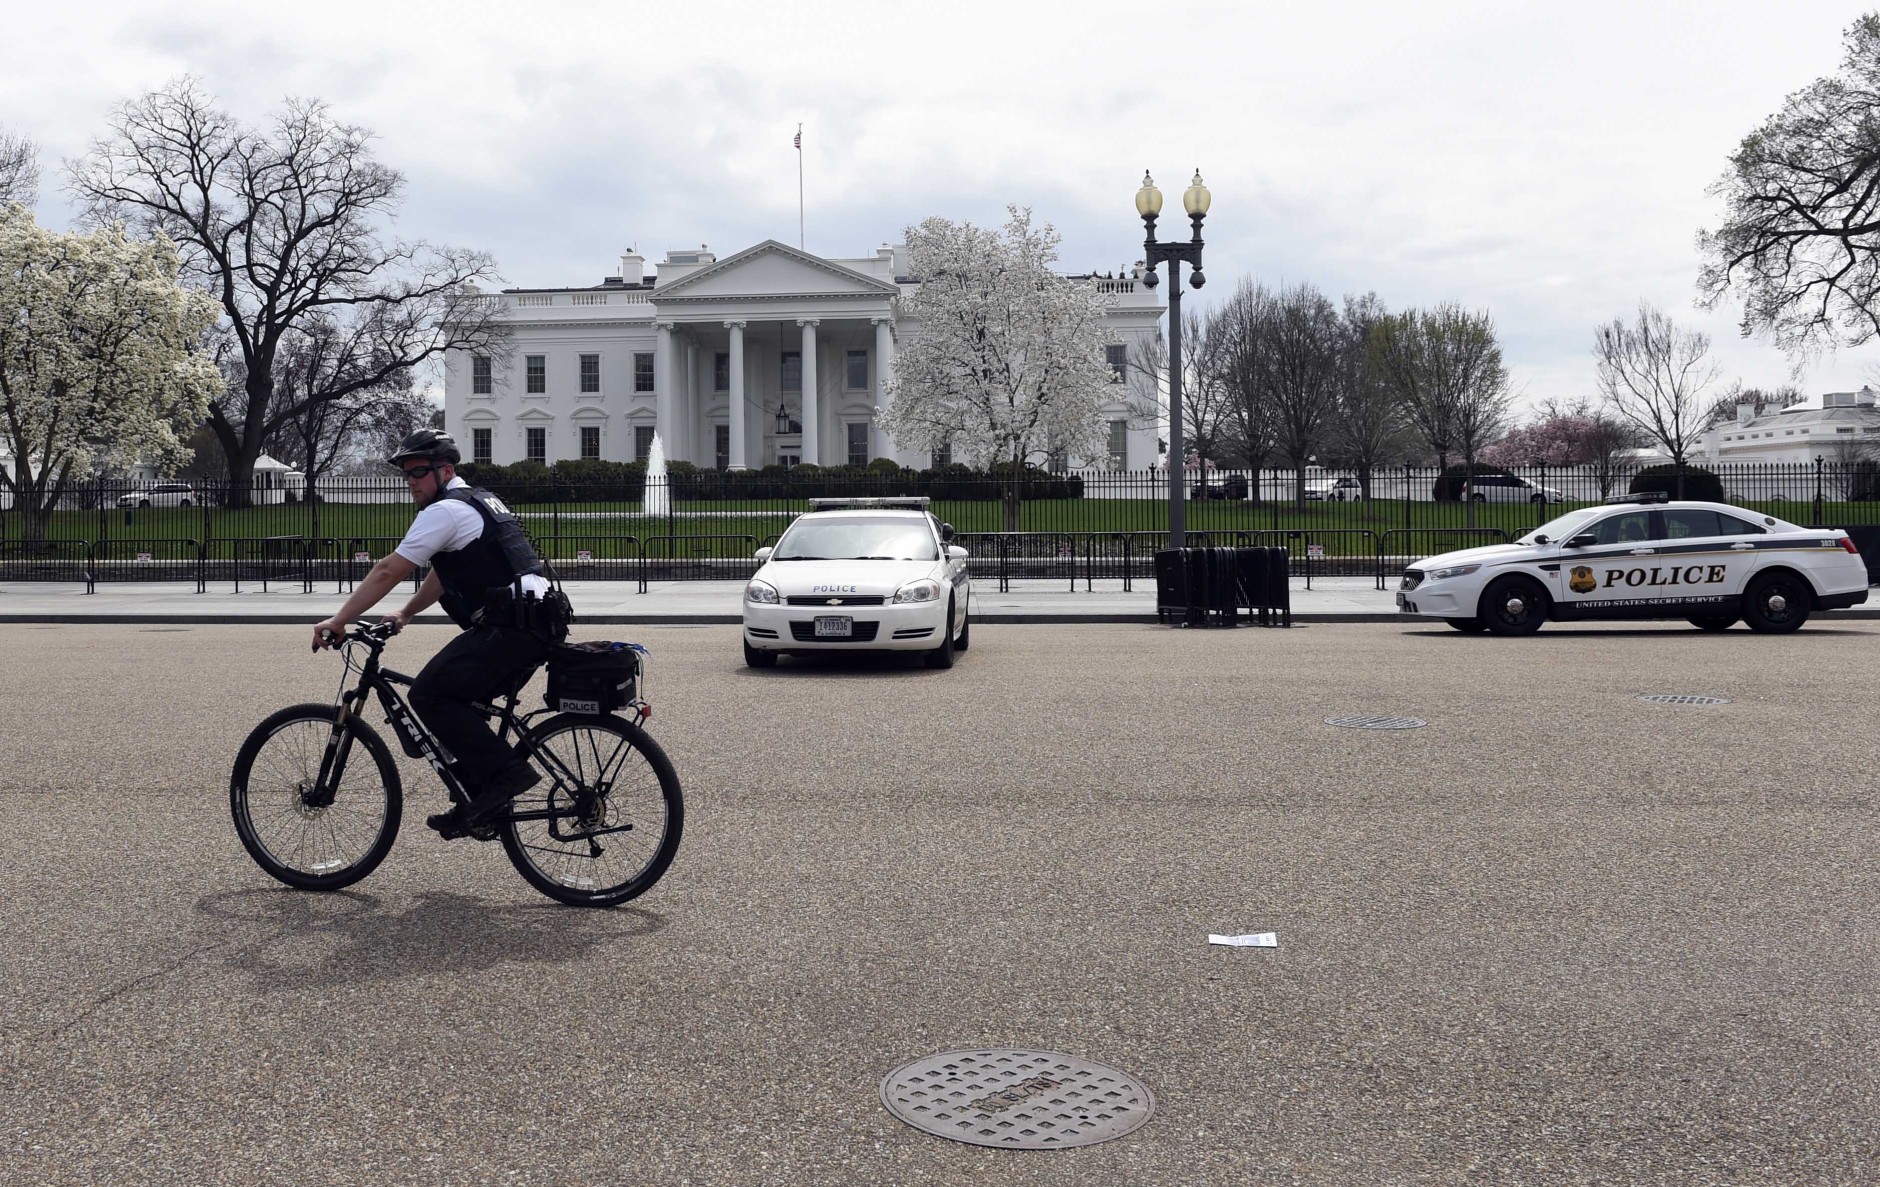 A Secret Service rides his bike on Pennsylvania Avenue outside the White House in Washington, Tuesday, April 7, 2015. The White House, State Department, and Capitol were all affected by reports of widespread power outages across Washington and its suburbs Tuesday afternoon.  (AP Photo/Susan Walsh)